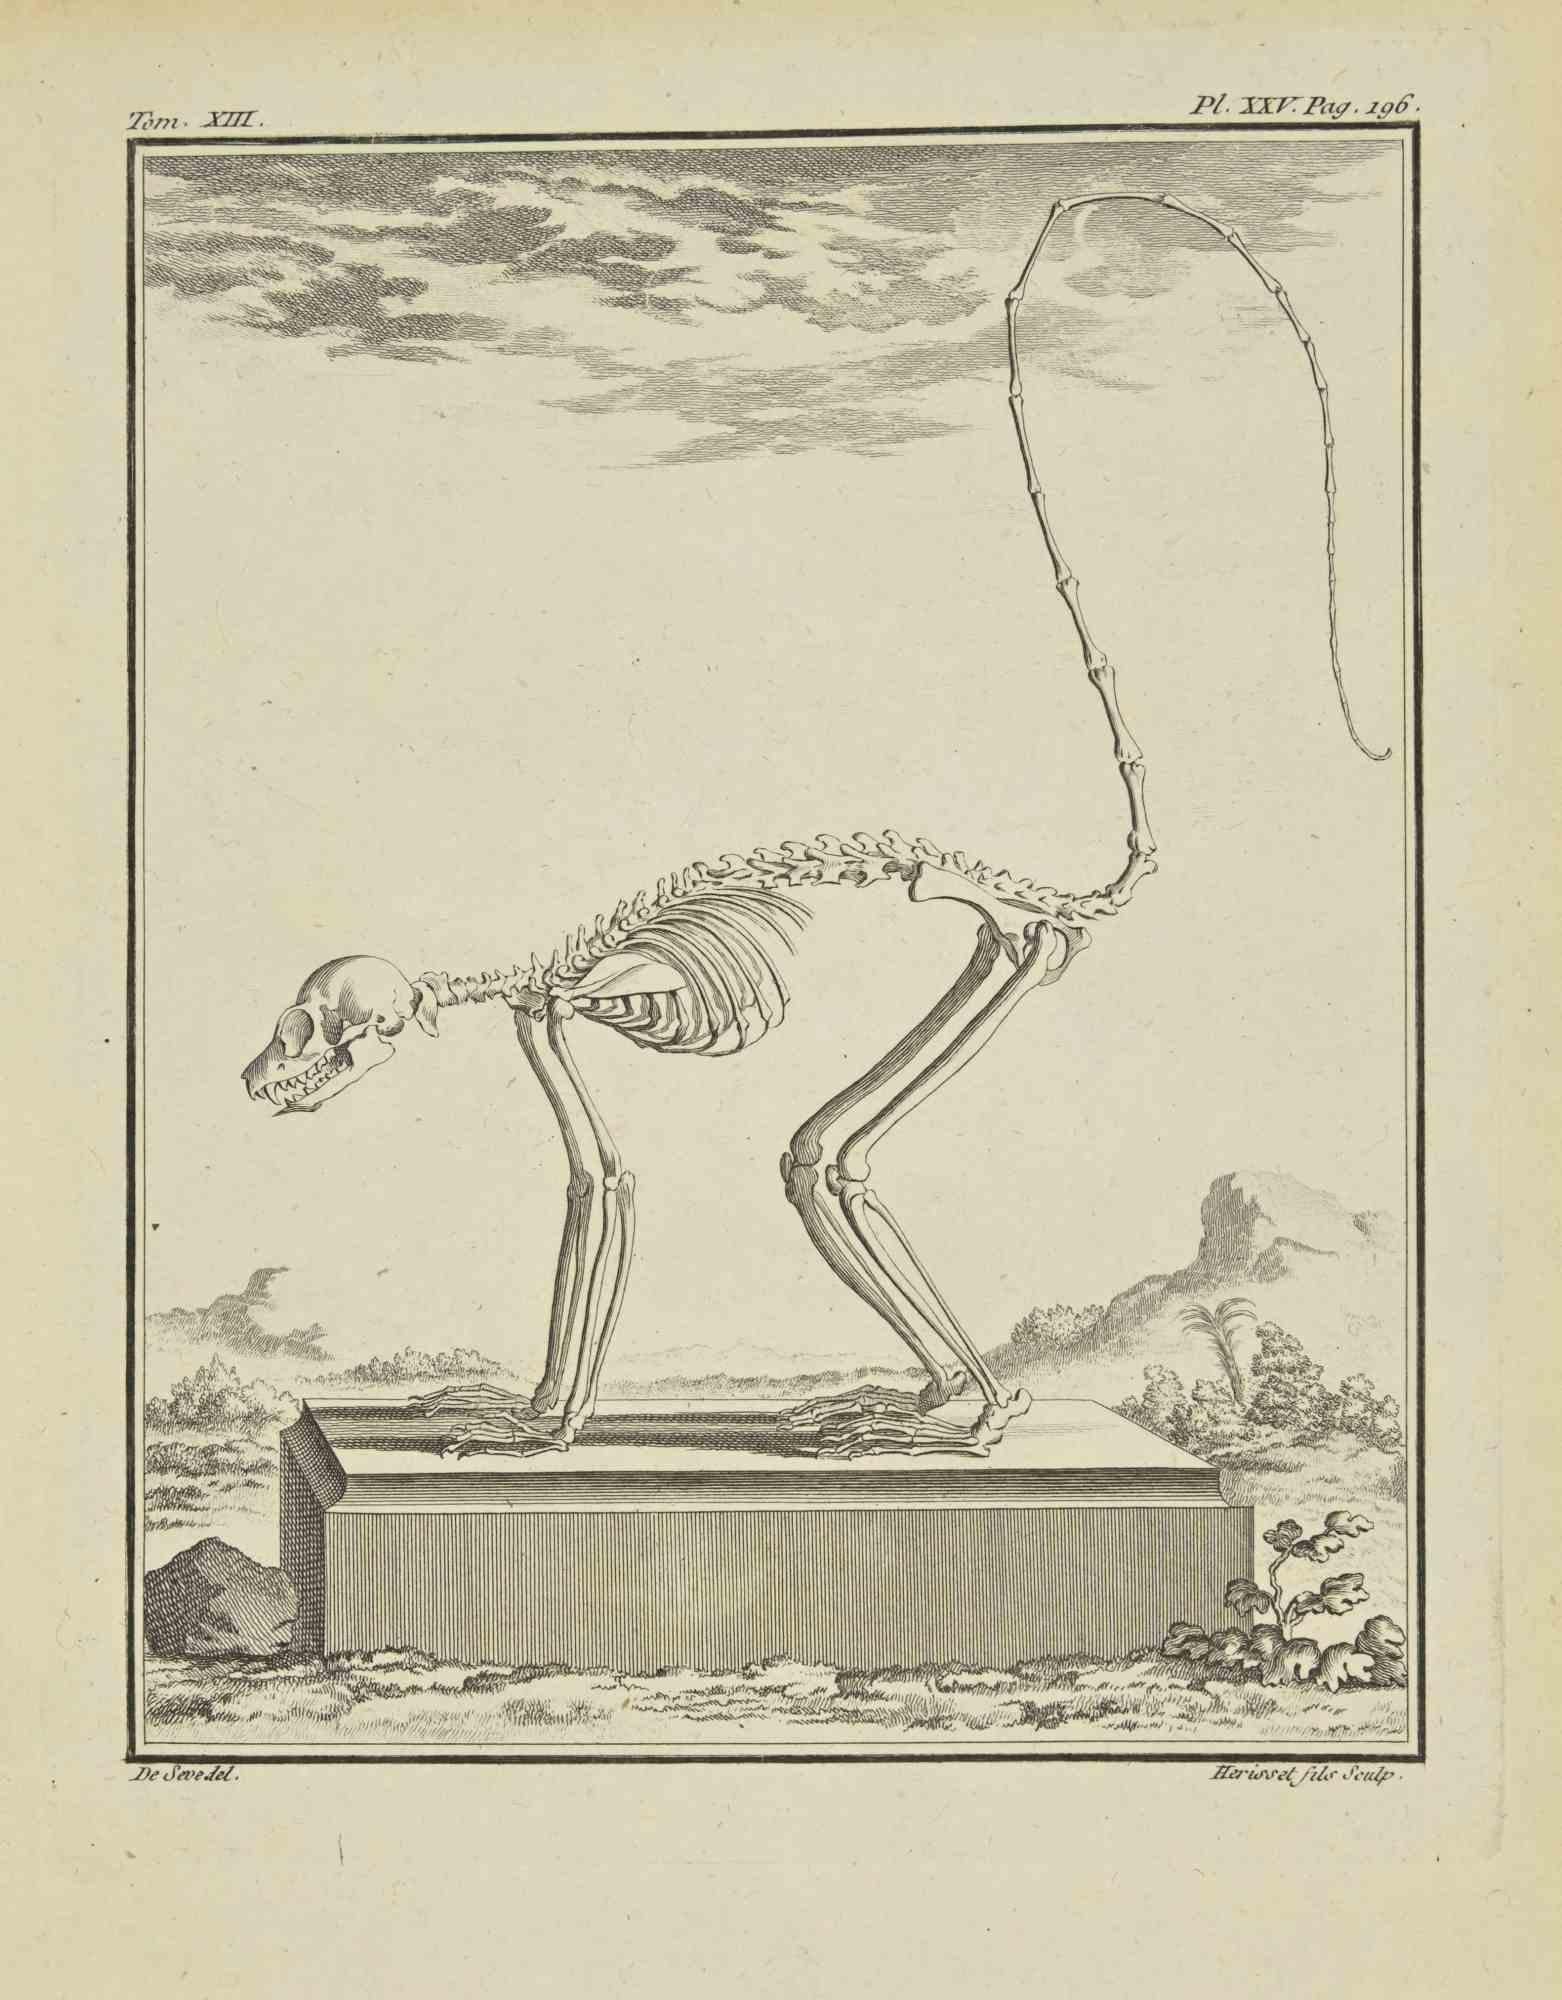 The Skeleton - Etching by Herisset  - 1771